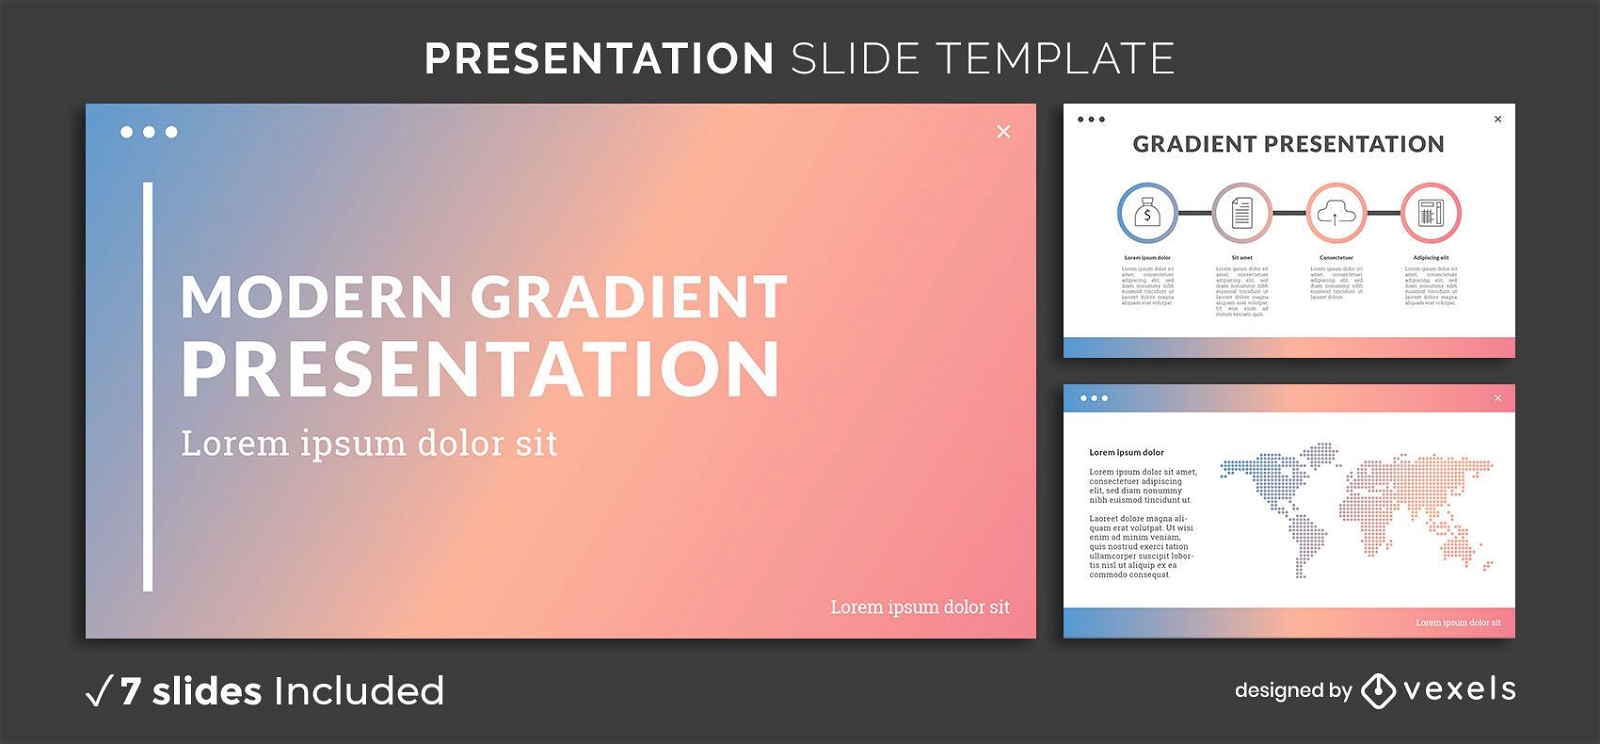 Ppt Presentation Templates For Business